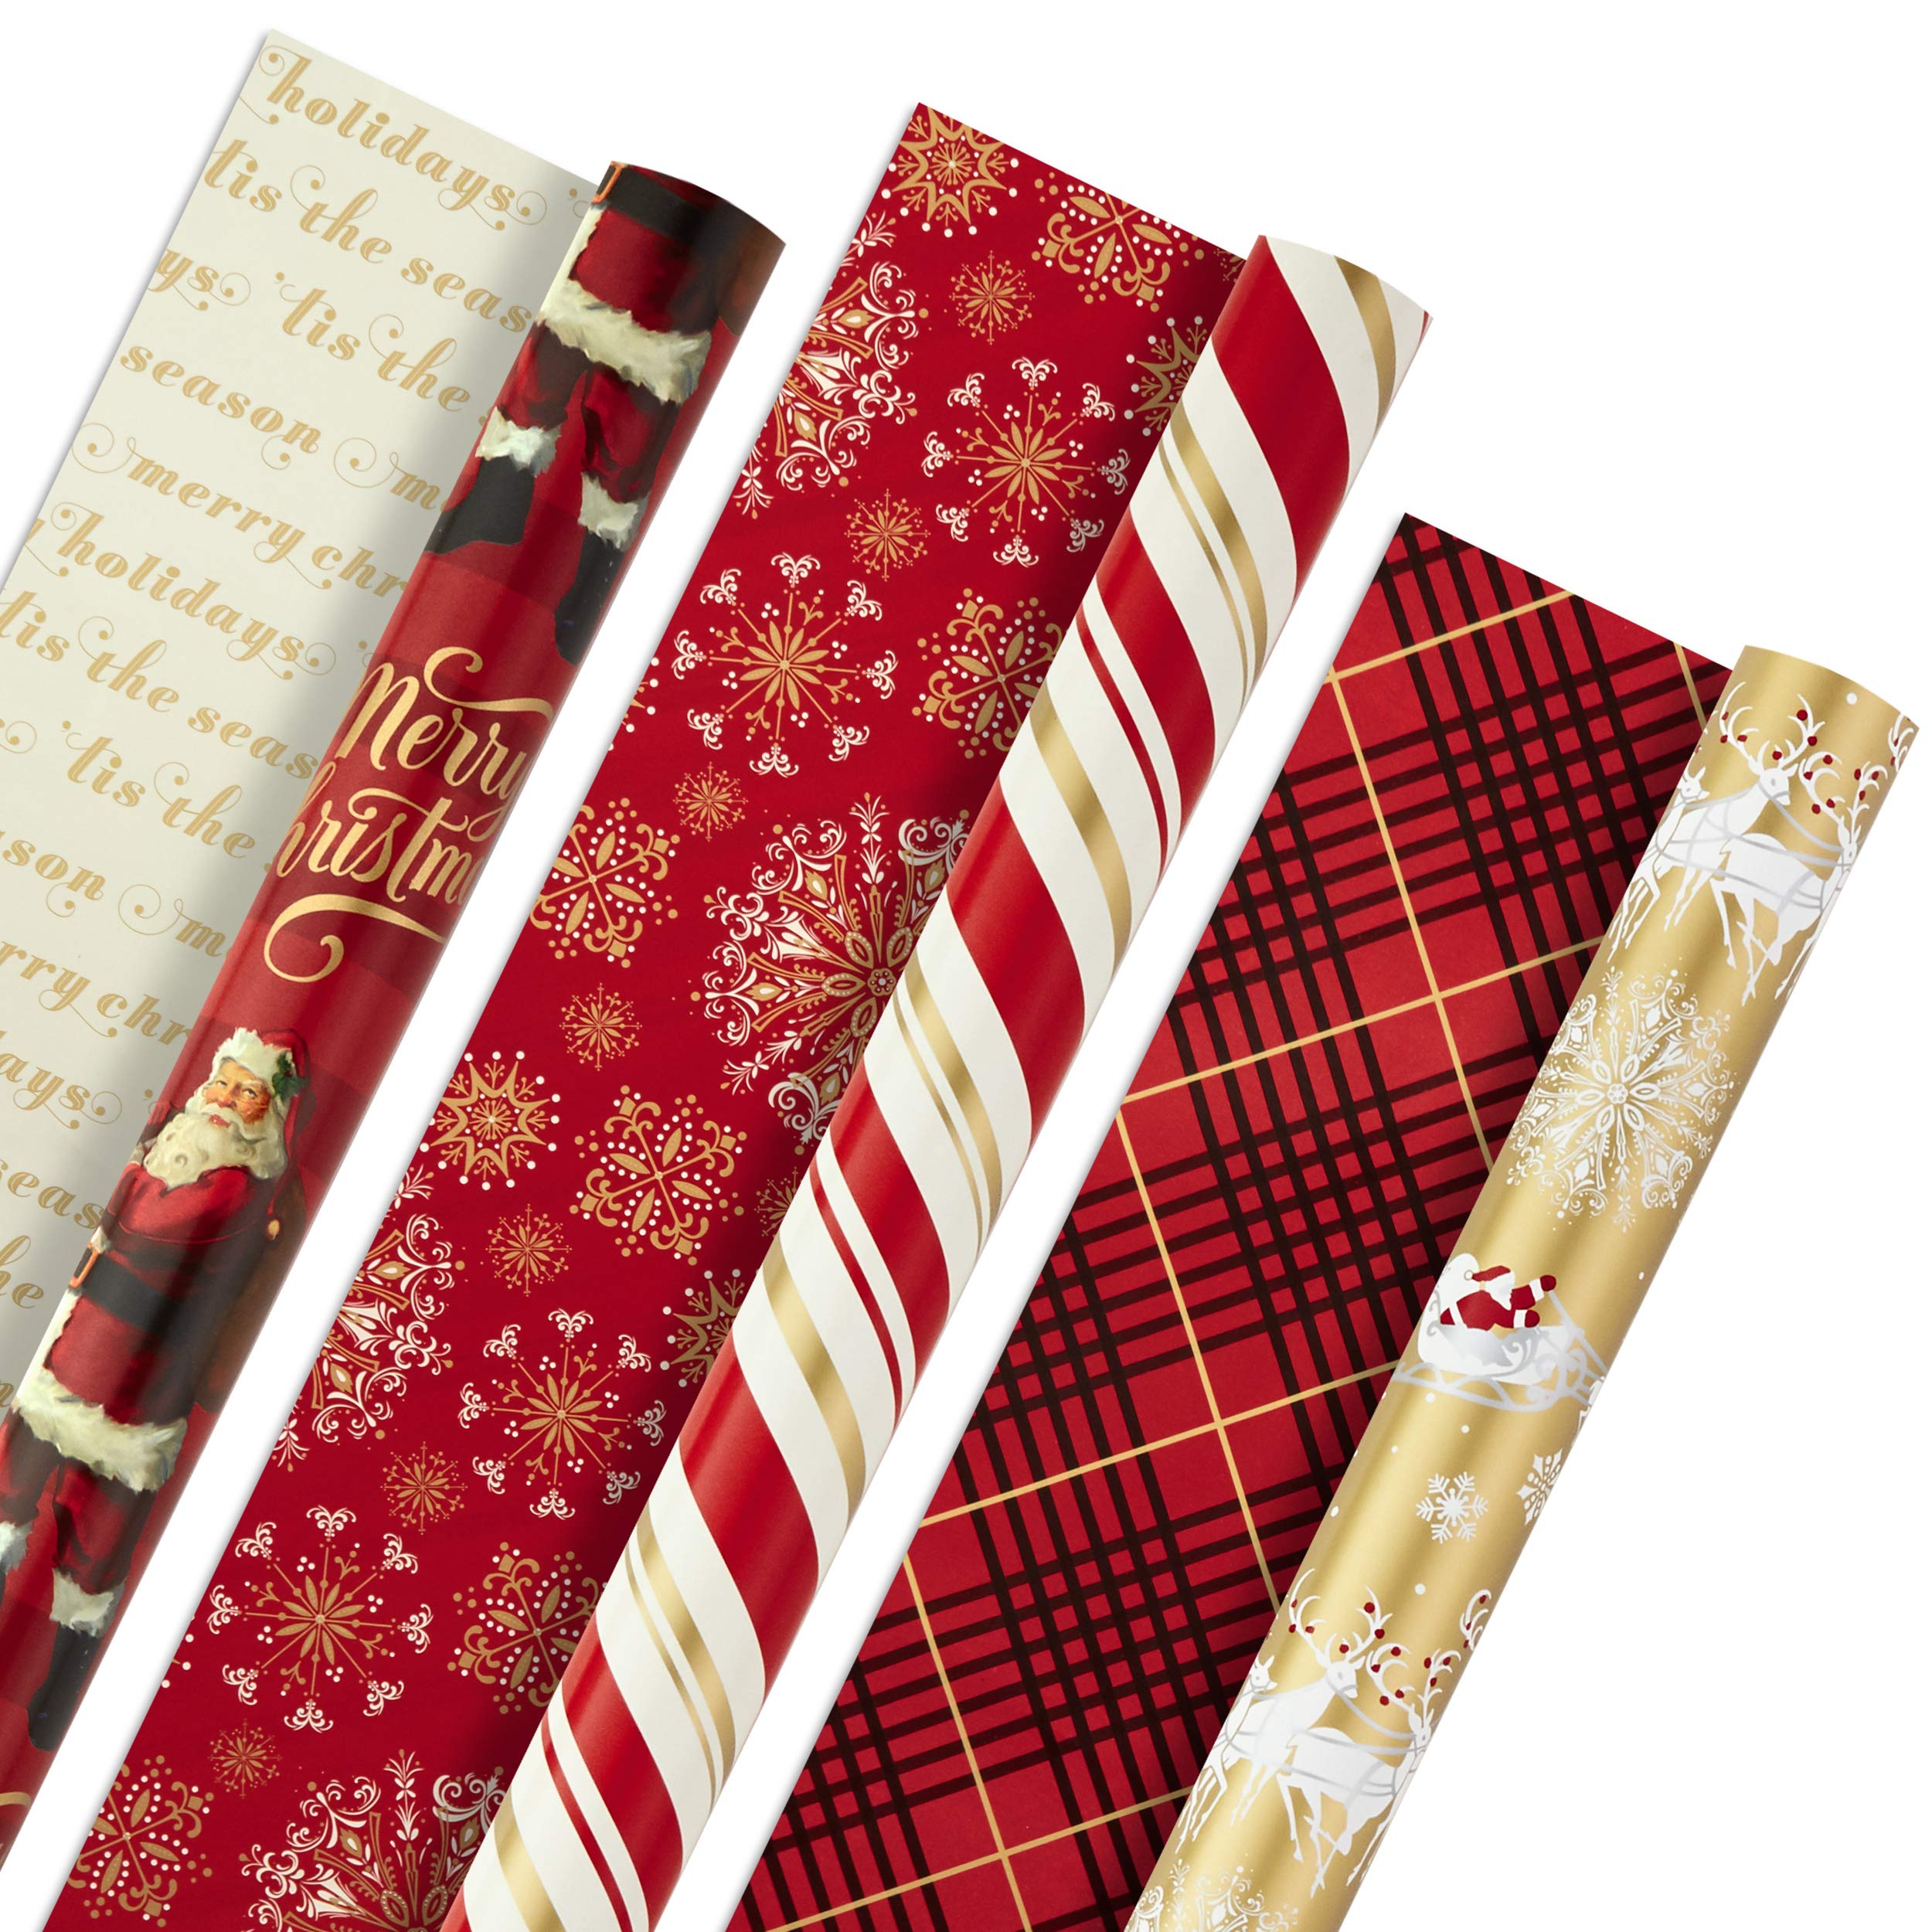 Hallmark Christmas Reversible Wrapping Paper, Classic Santa (Pack of 3, 120 sq. ft. ttl) Red and Gold Snowflakes, Stripes, Plaid, Santa's Sleigh (5JXW1029)